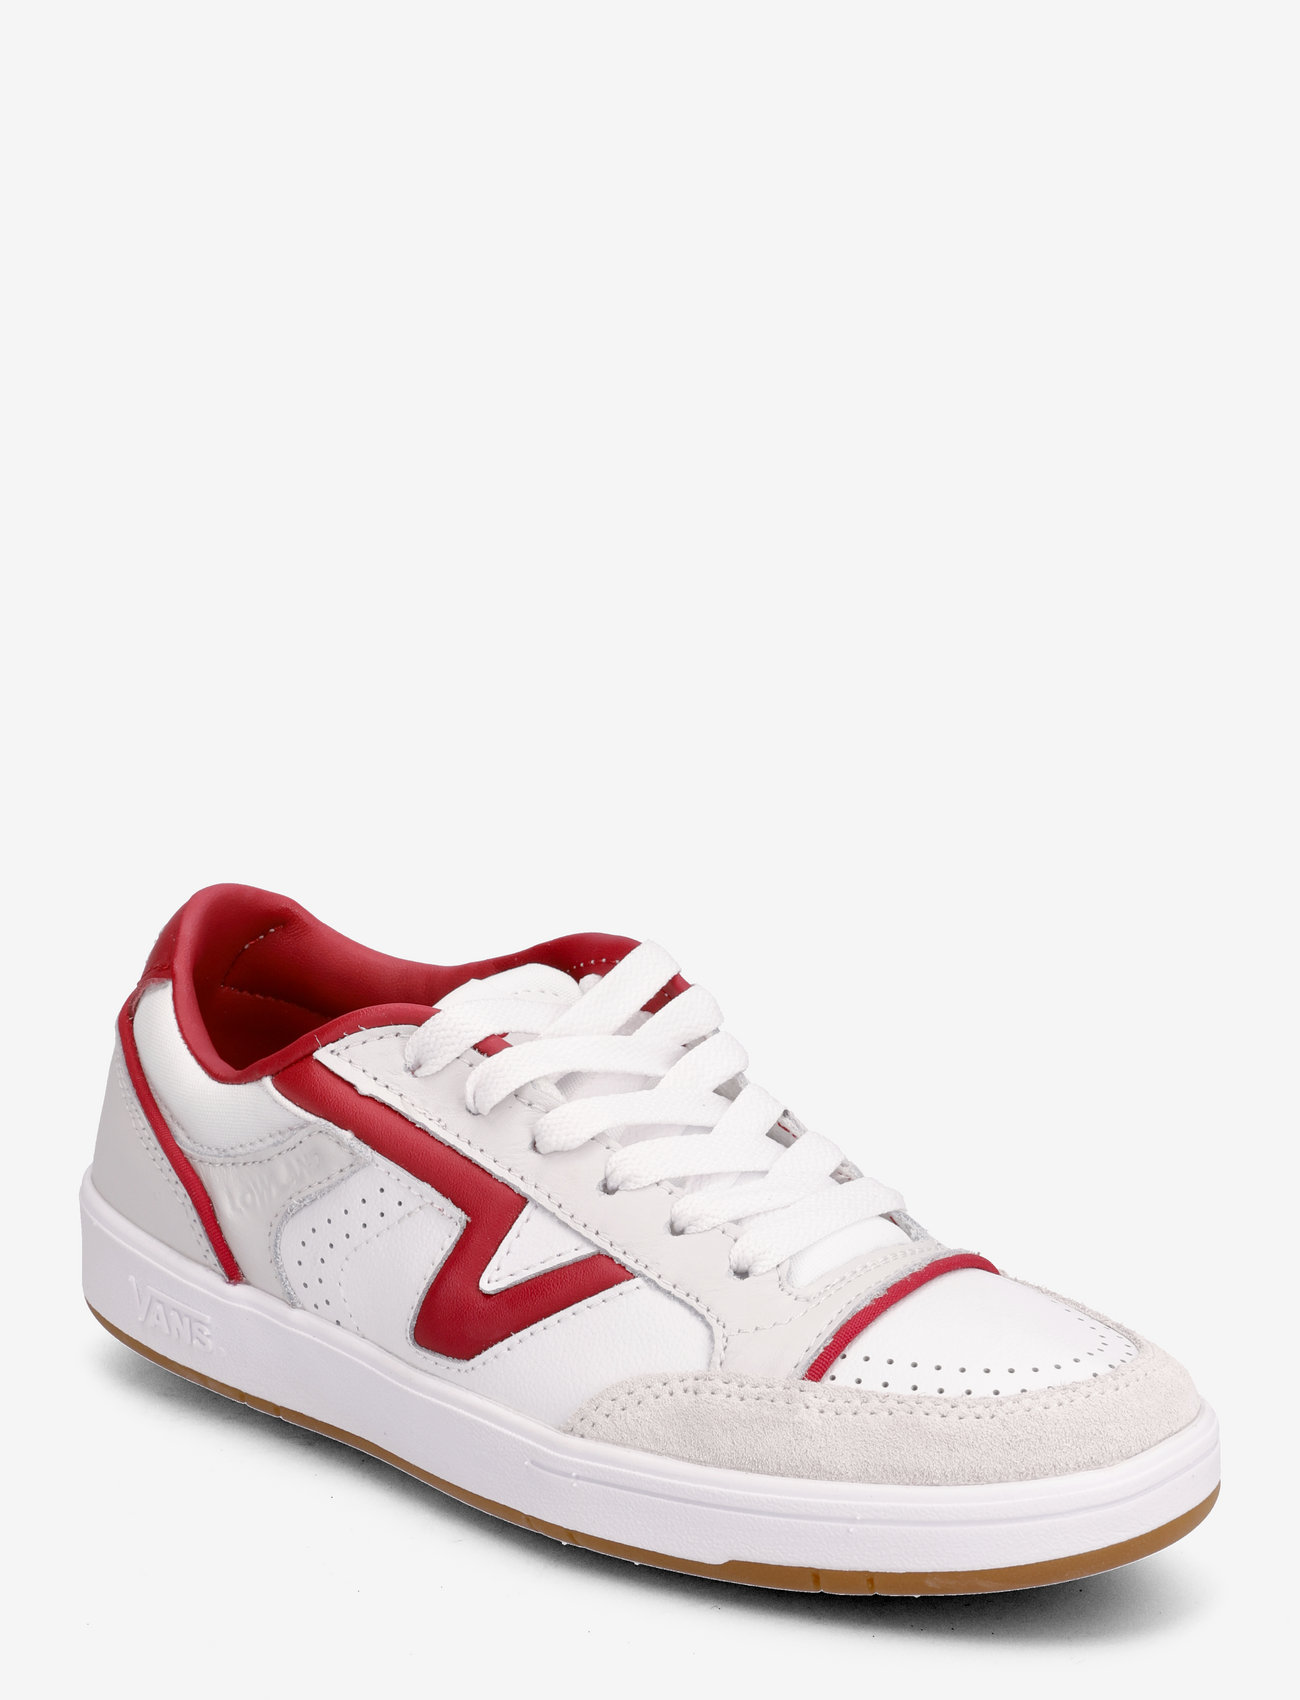 VANS - Lowland CC JMP R - low top sneakers - court red/white - 0